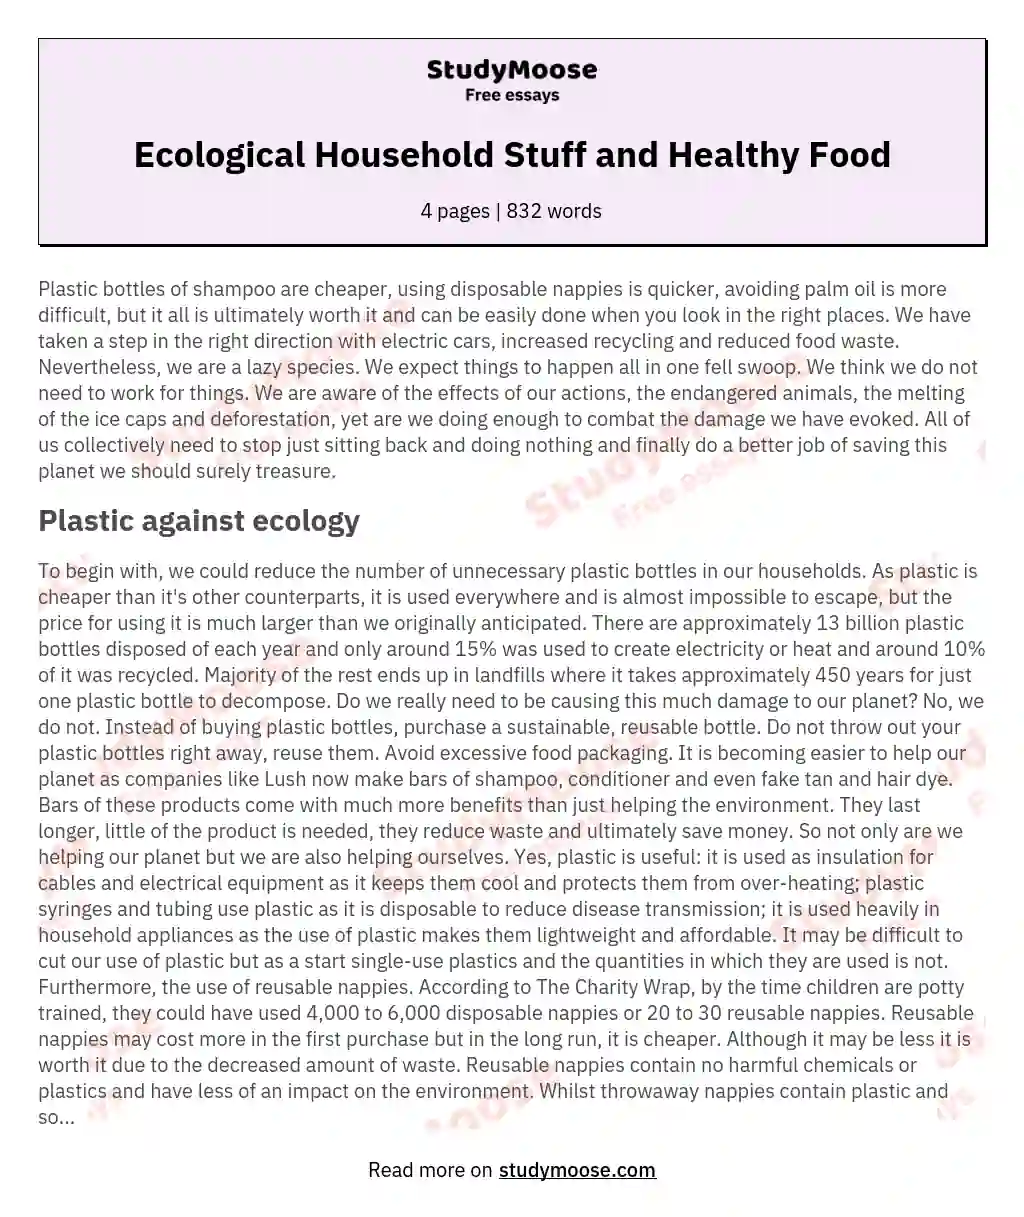 Ecological Household Stuff and Healthy Food essay